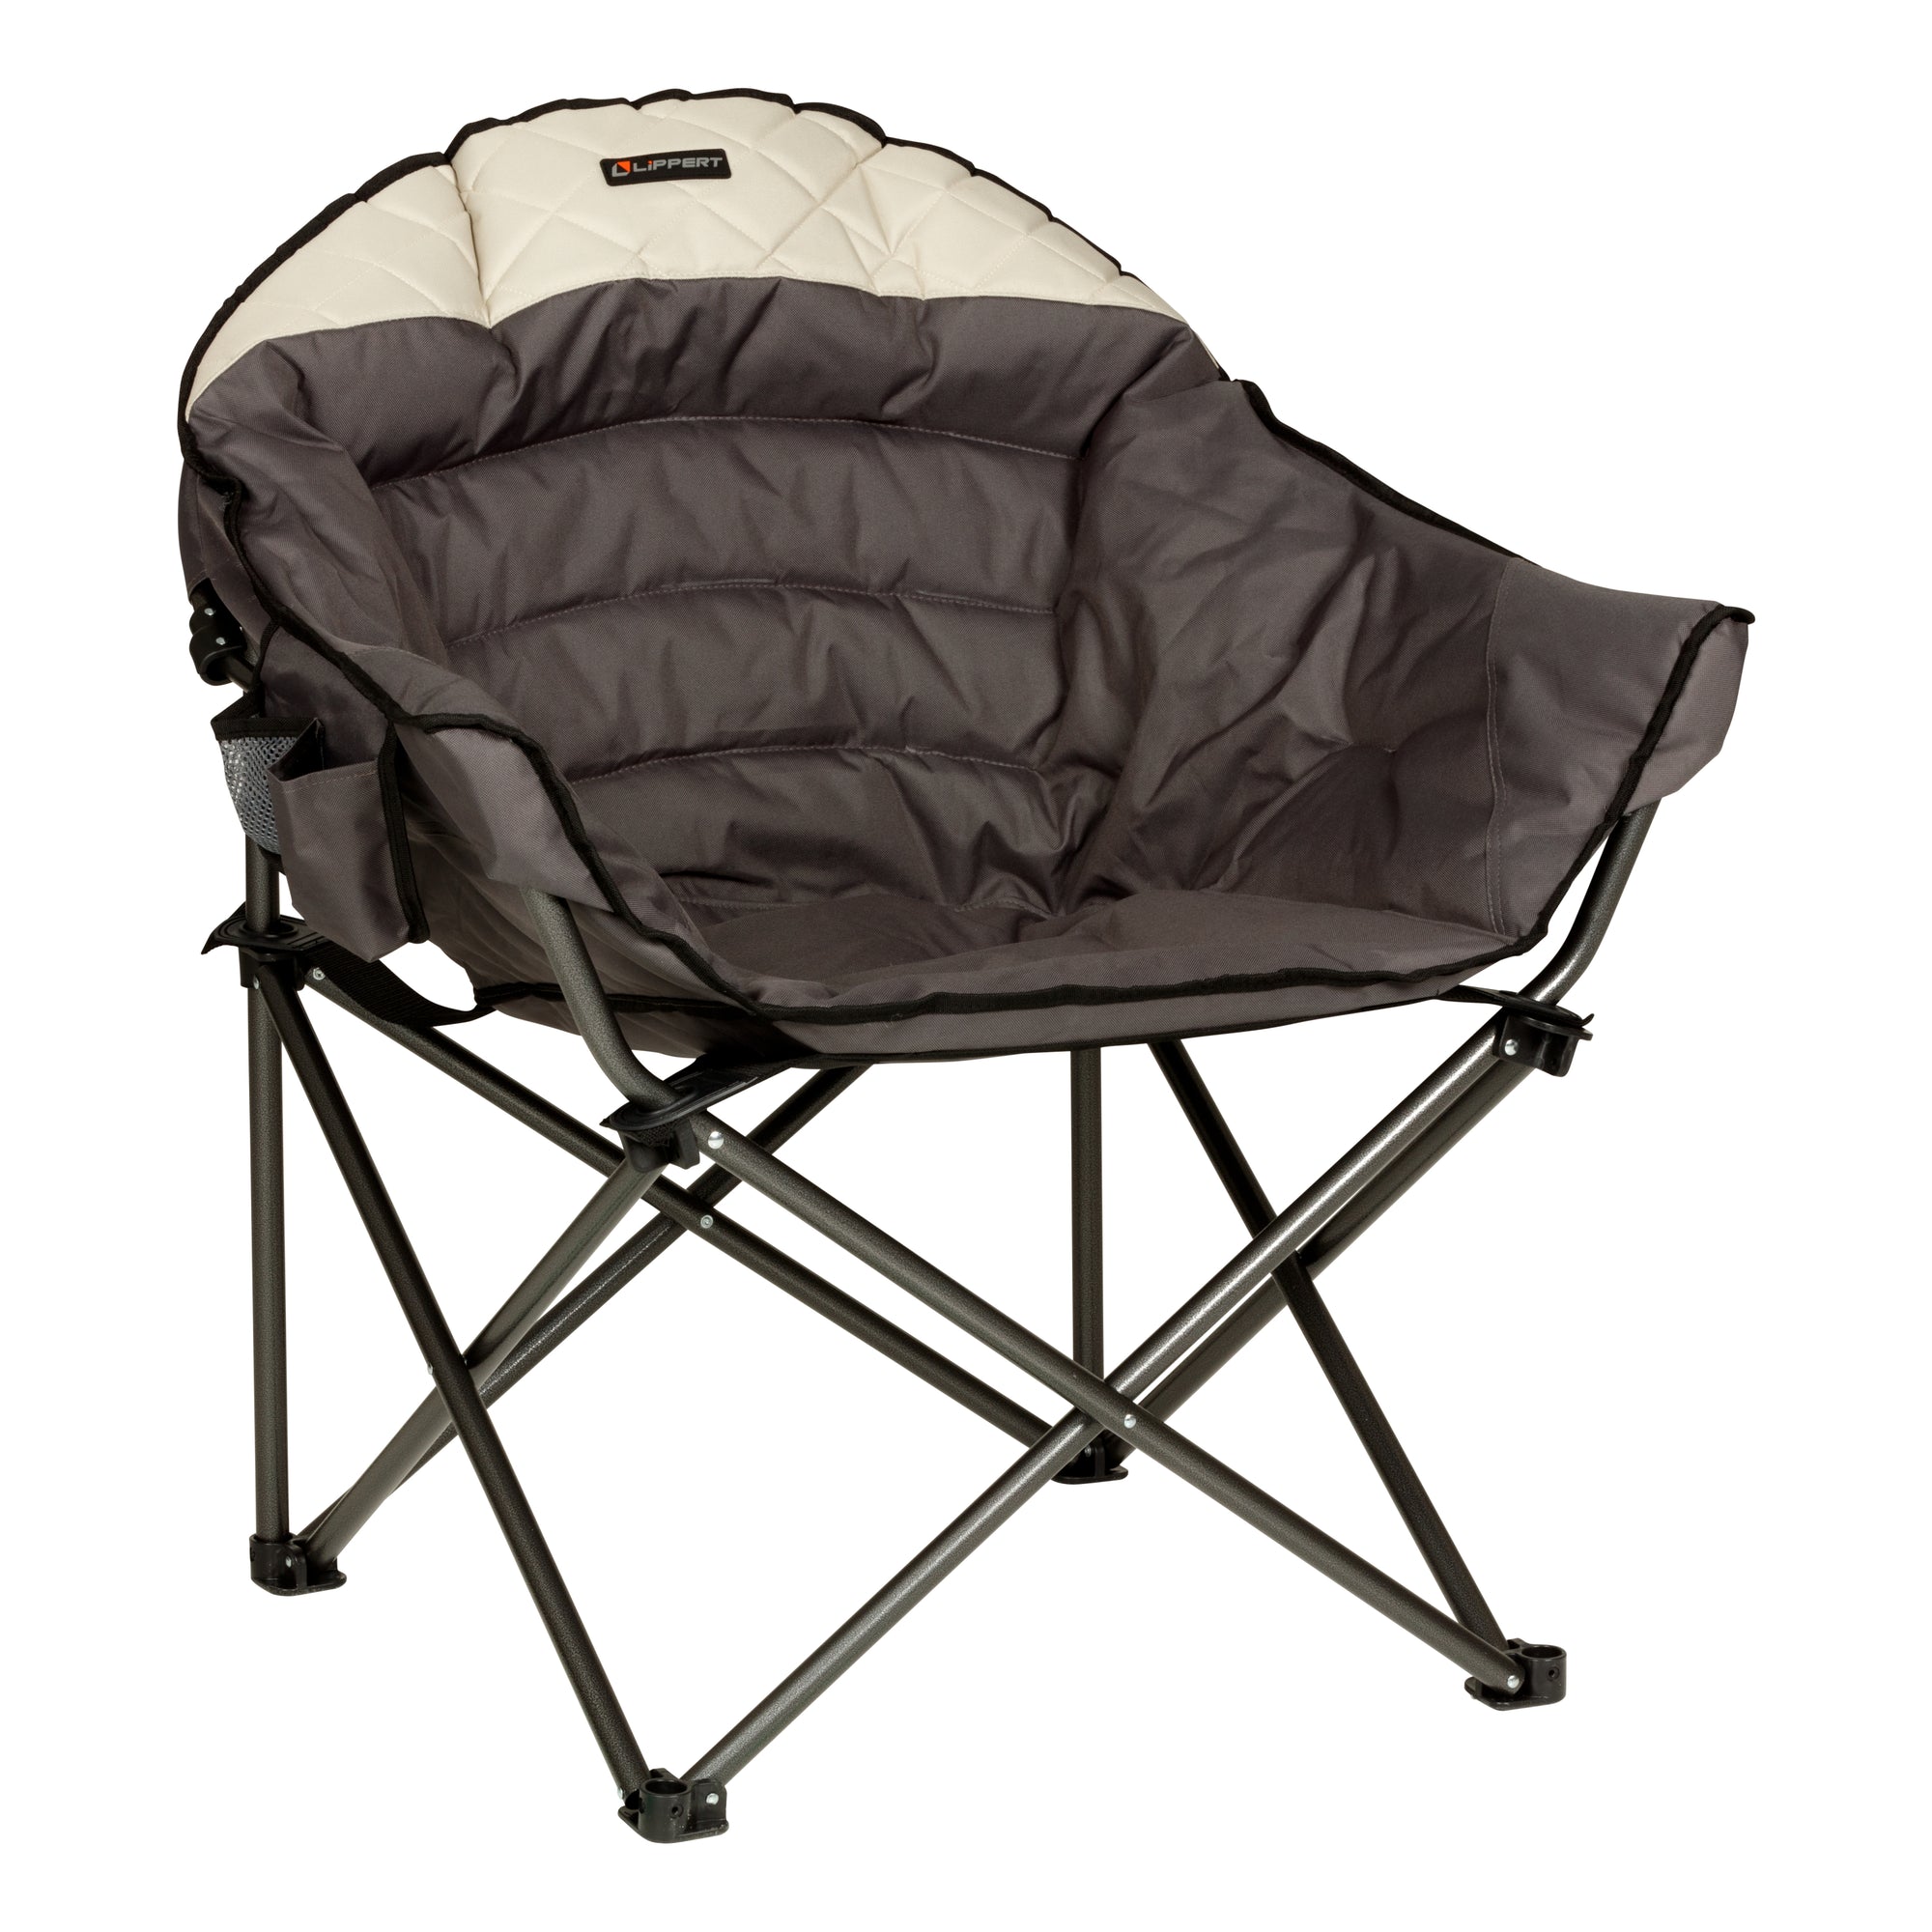 Lippert 2022114817 Big Bear Duotone Camping Chair - Dark Gray with Sand Accent